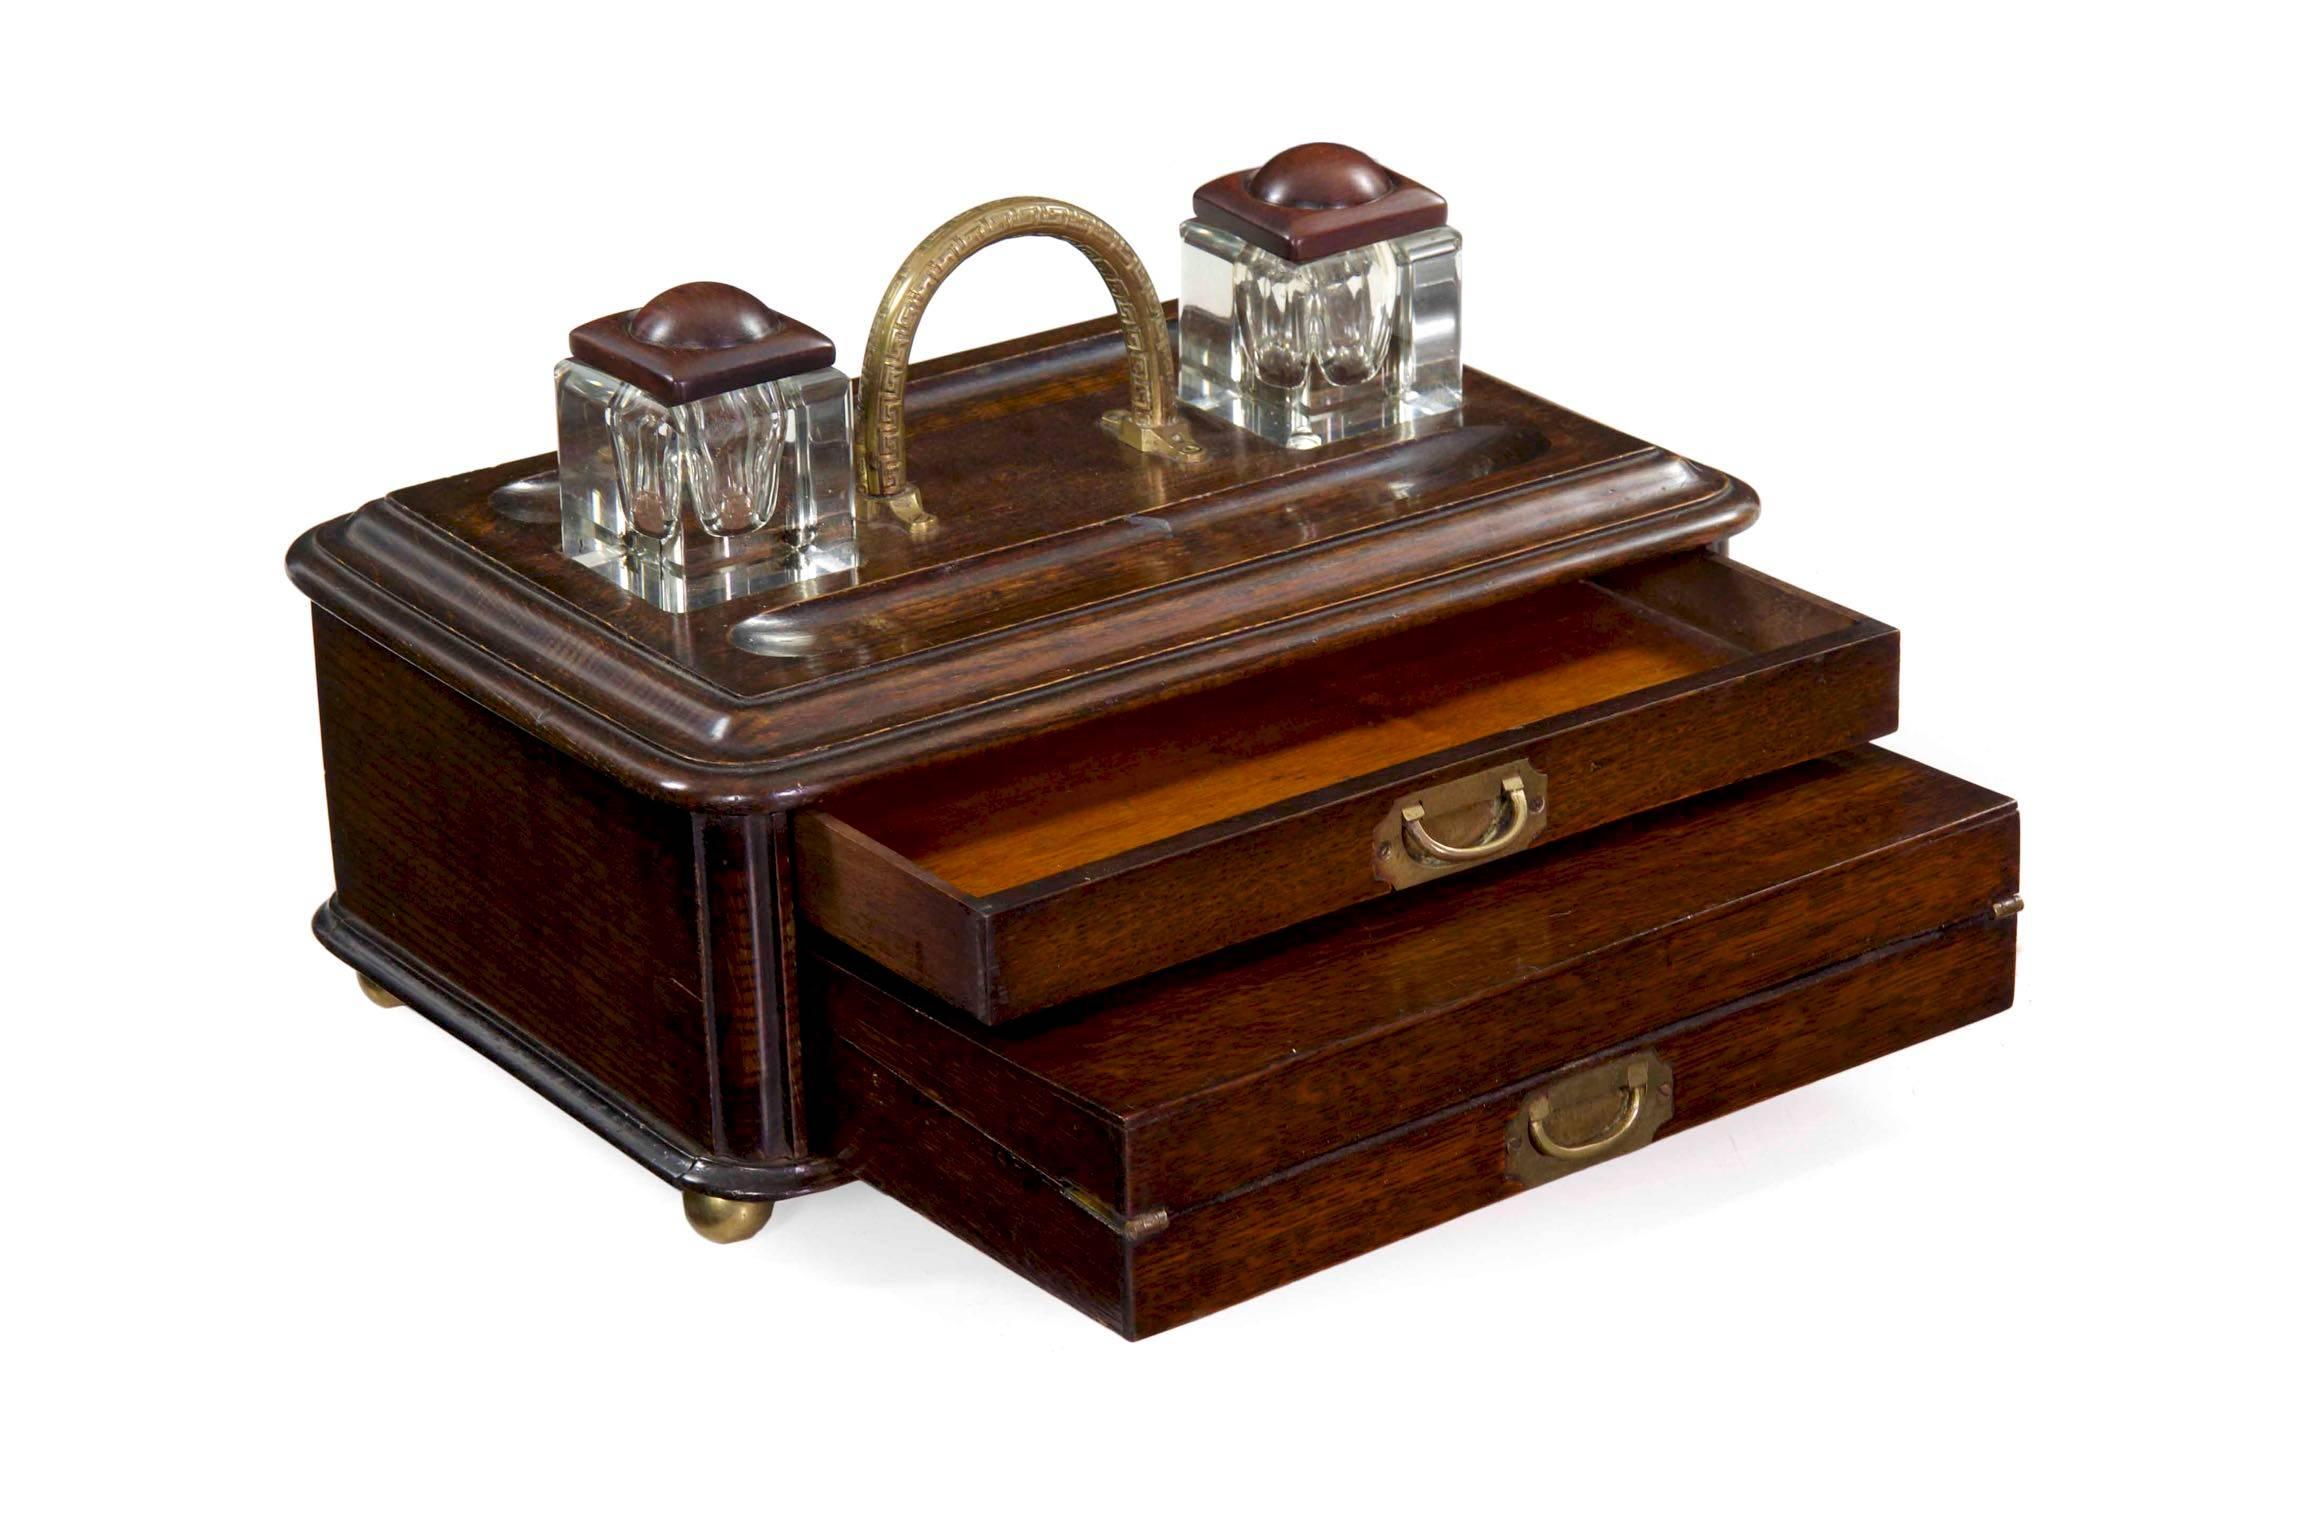 An unusual and most attractive English writing box from the late Victorian period, the box is crafted of beautifully patinated and worn oak. The top has two recesses that cut glass wells rest within, these easily lifting free and portable, each with